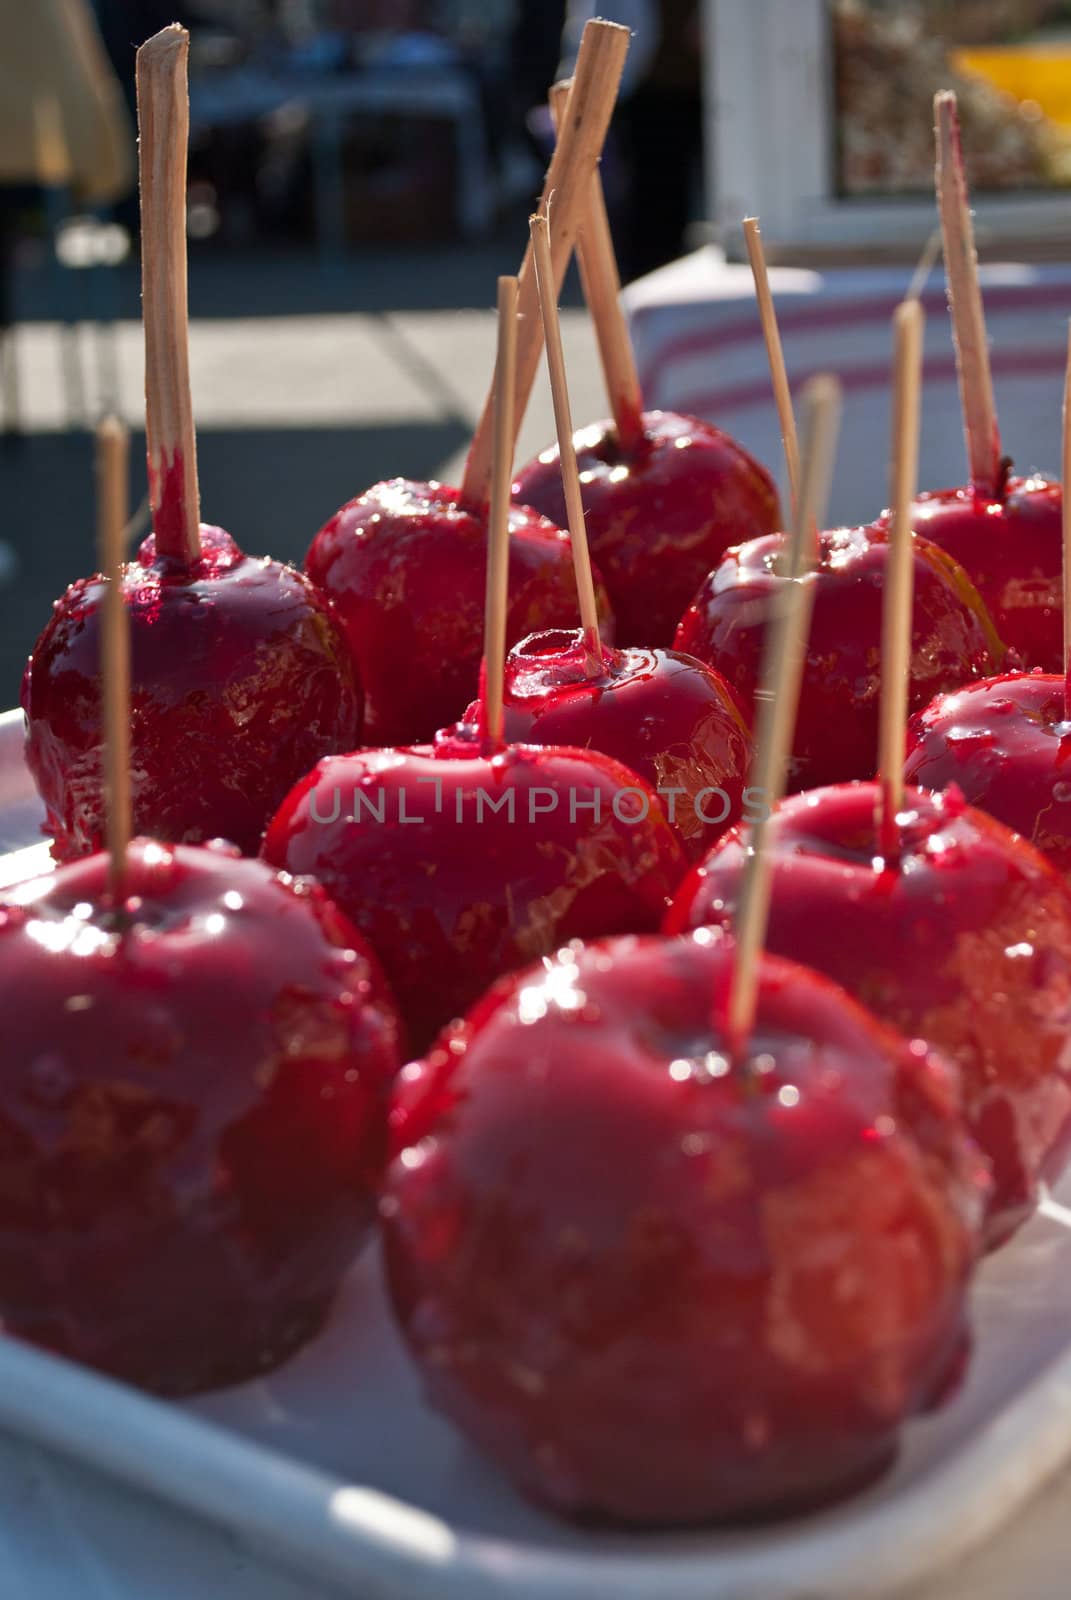 Red apples by robertblaga